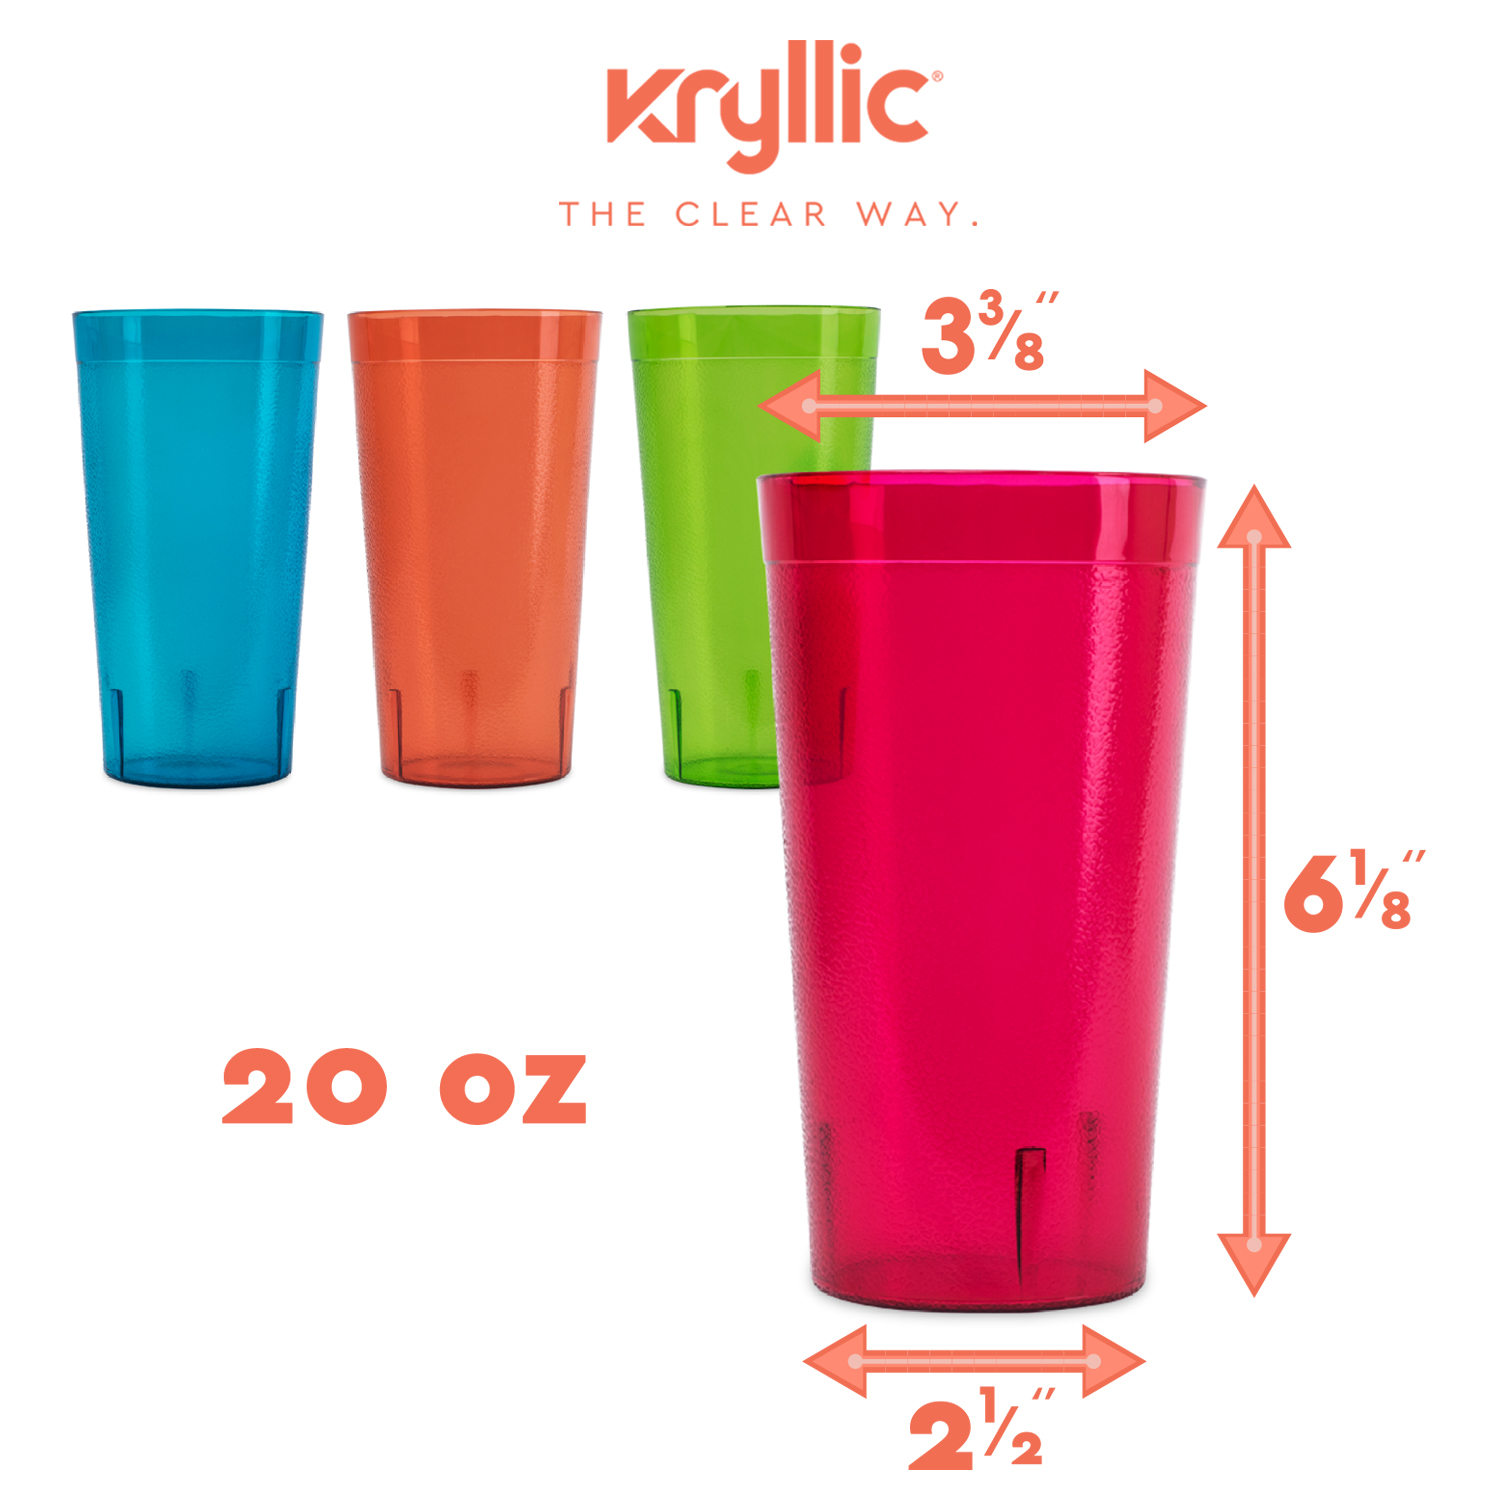 Plastic Cup Tumblers Drinkware Glasses - Break Resistant 20 oz. Kitchen Restaurant High Quality Set of 16 in 4 Assorted Colors - Best Gift Idea By Kryllic - image 3 of 11